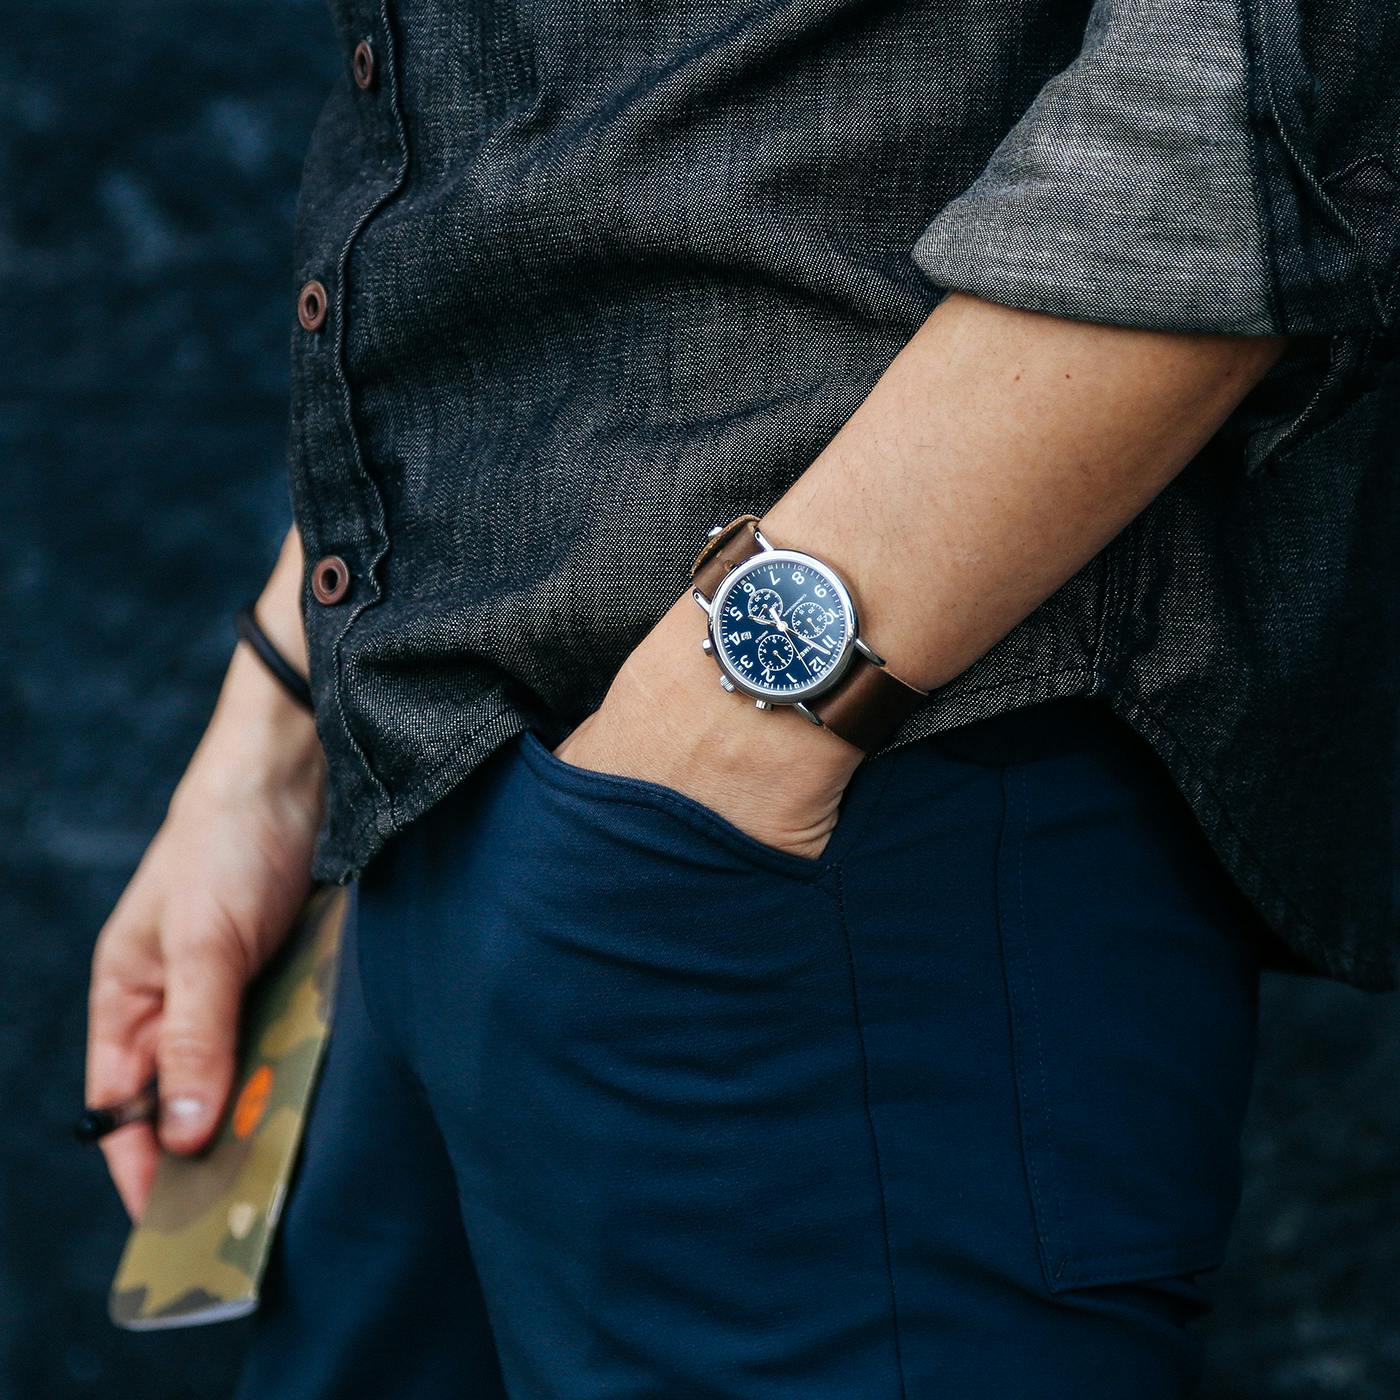 Form•Function•Form Horween Leather Chronograph